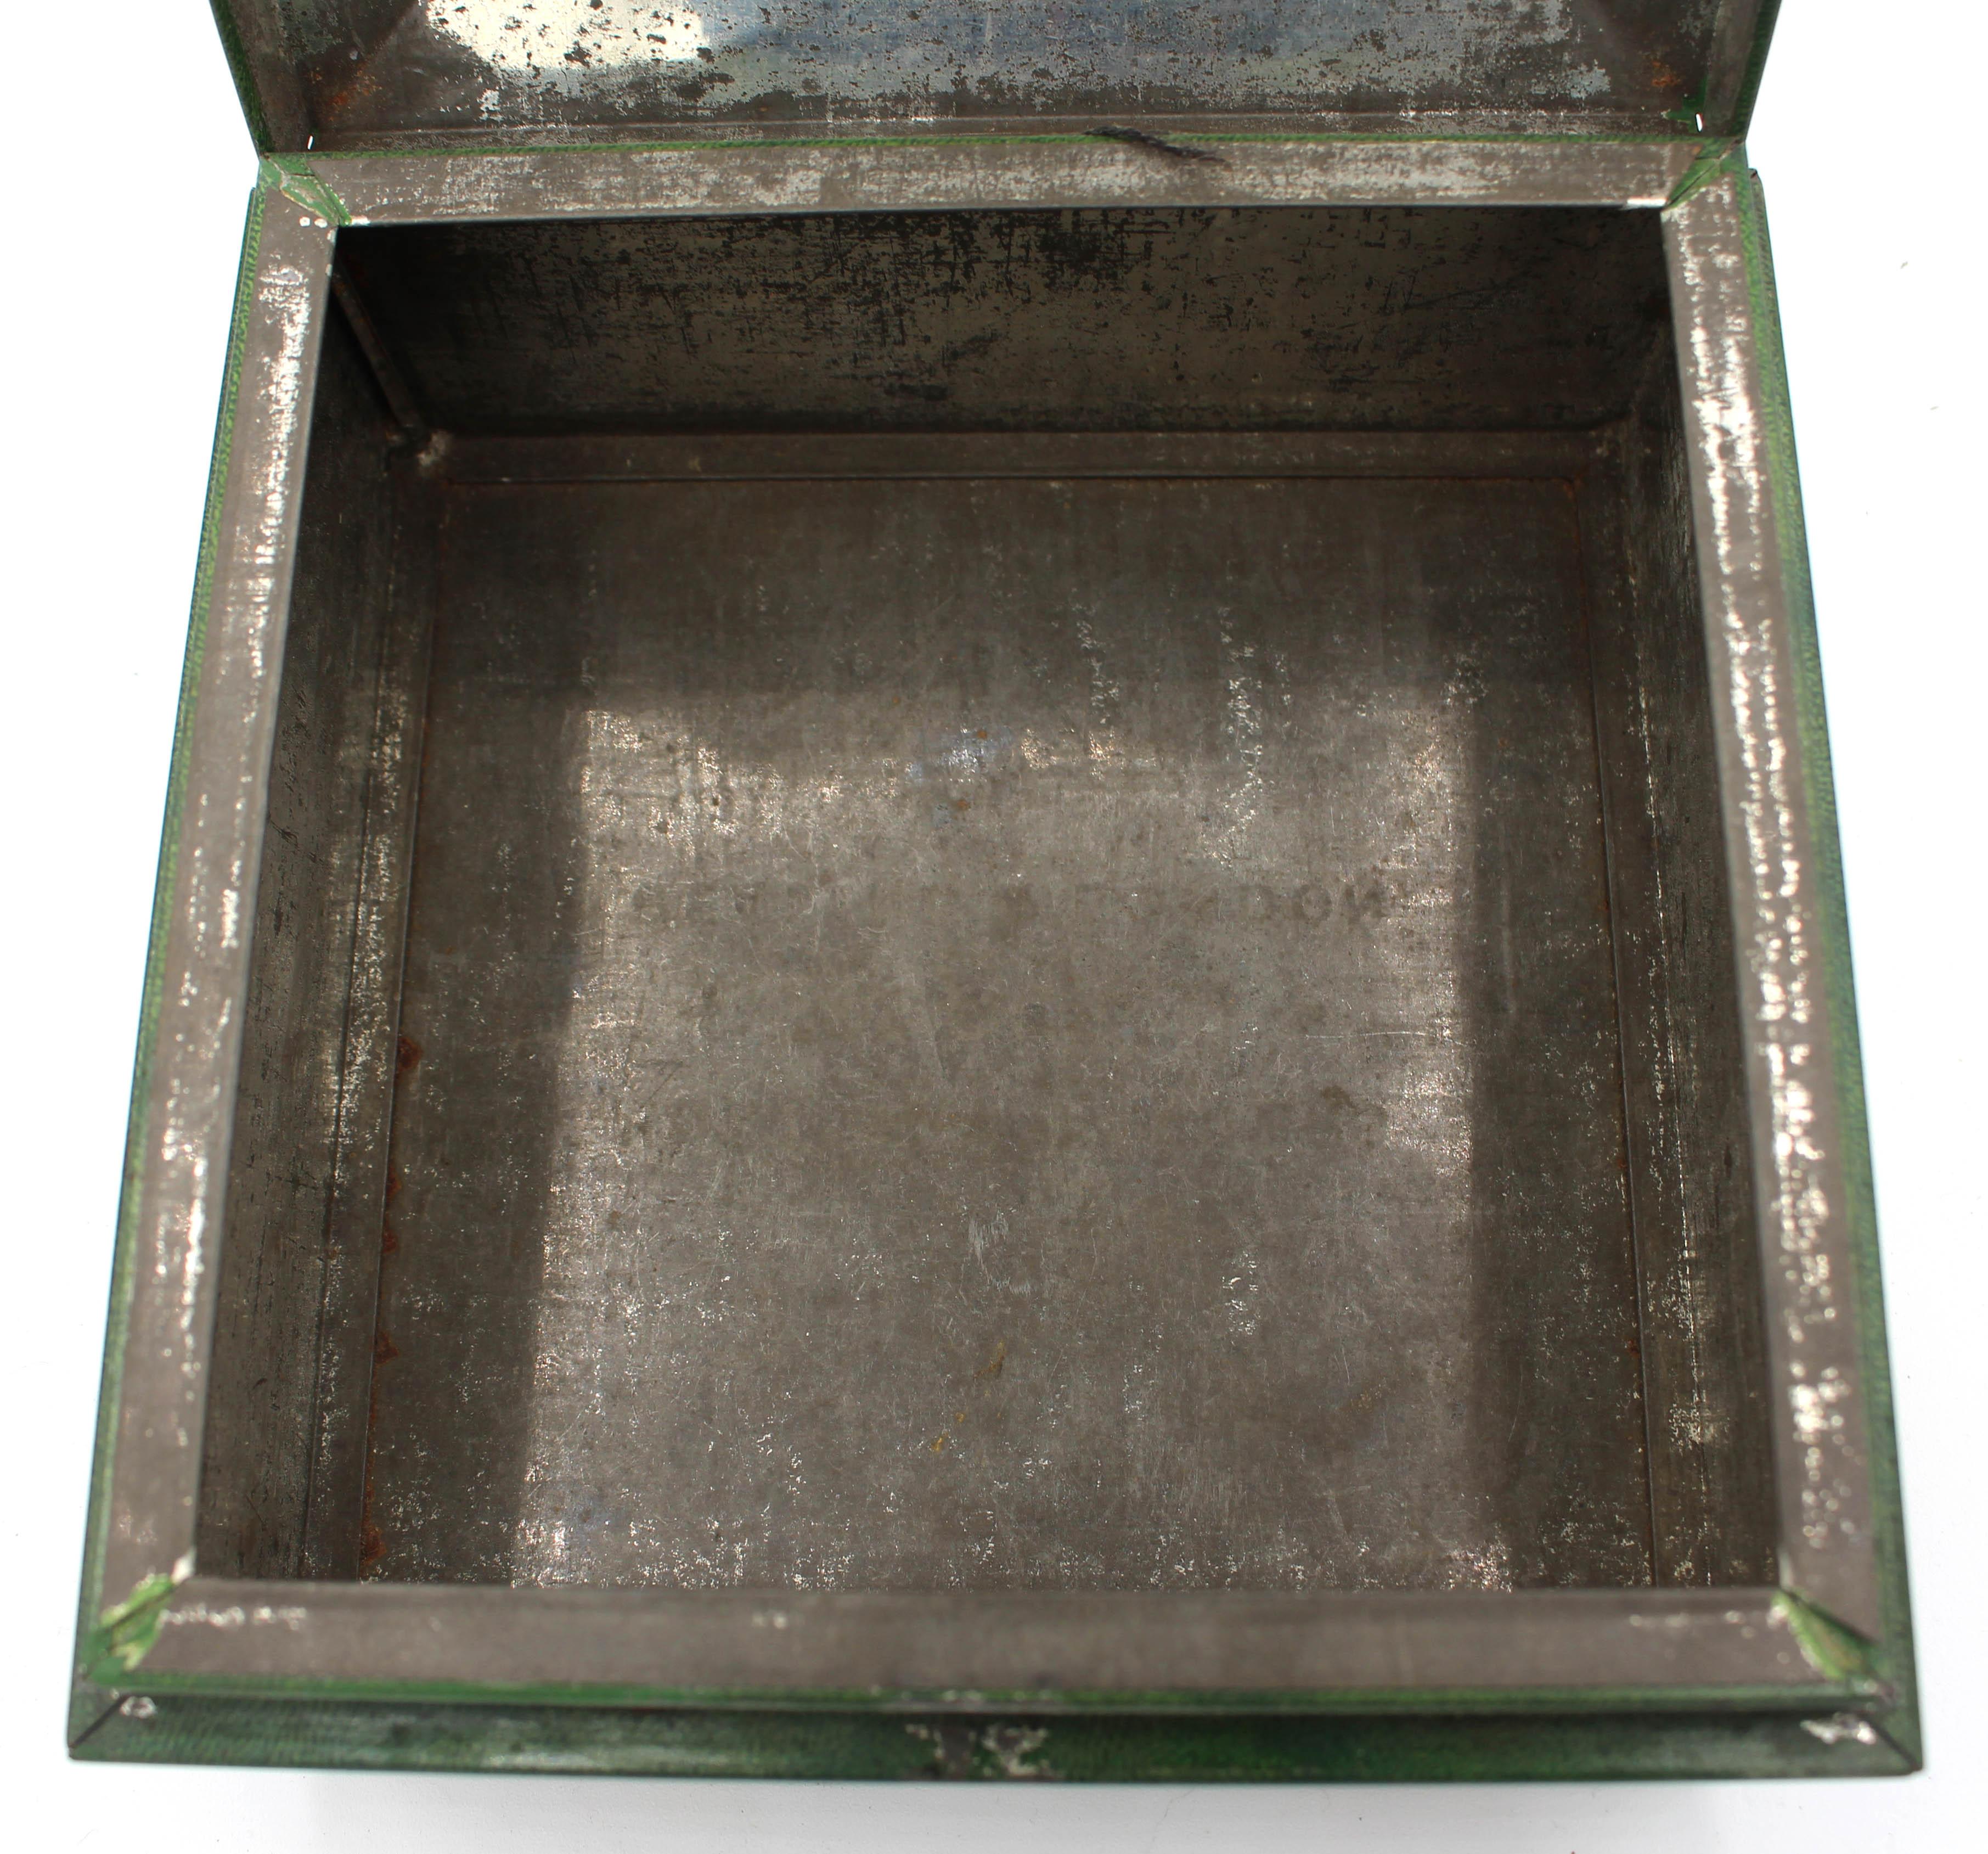 1903 Huntley & Palmers Jewelry Casket Form Biscuit Tin Box For Sale 2